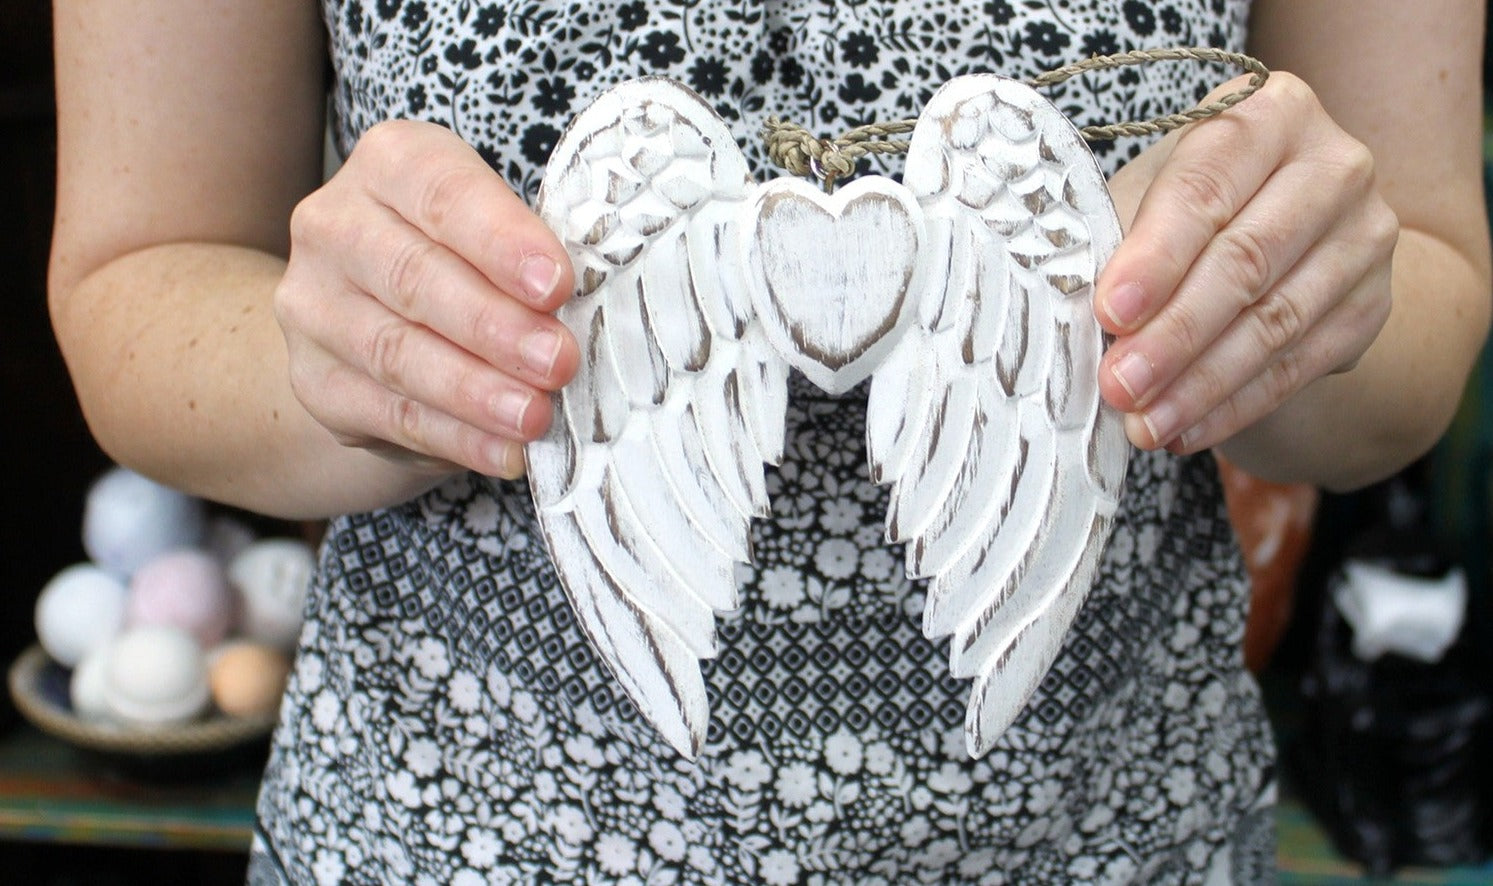 Hand Crafted Double Angel Wing and Heart - 15cm